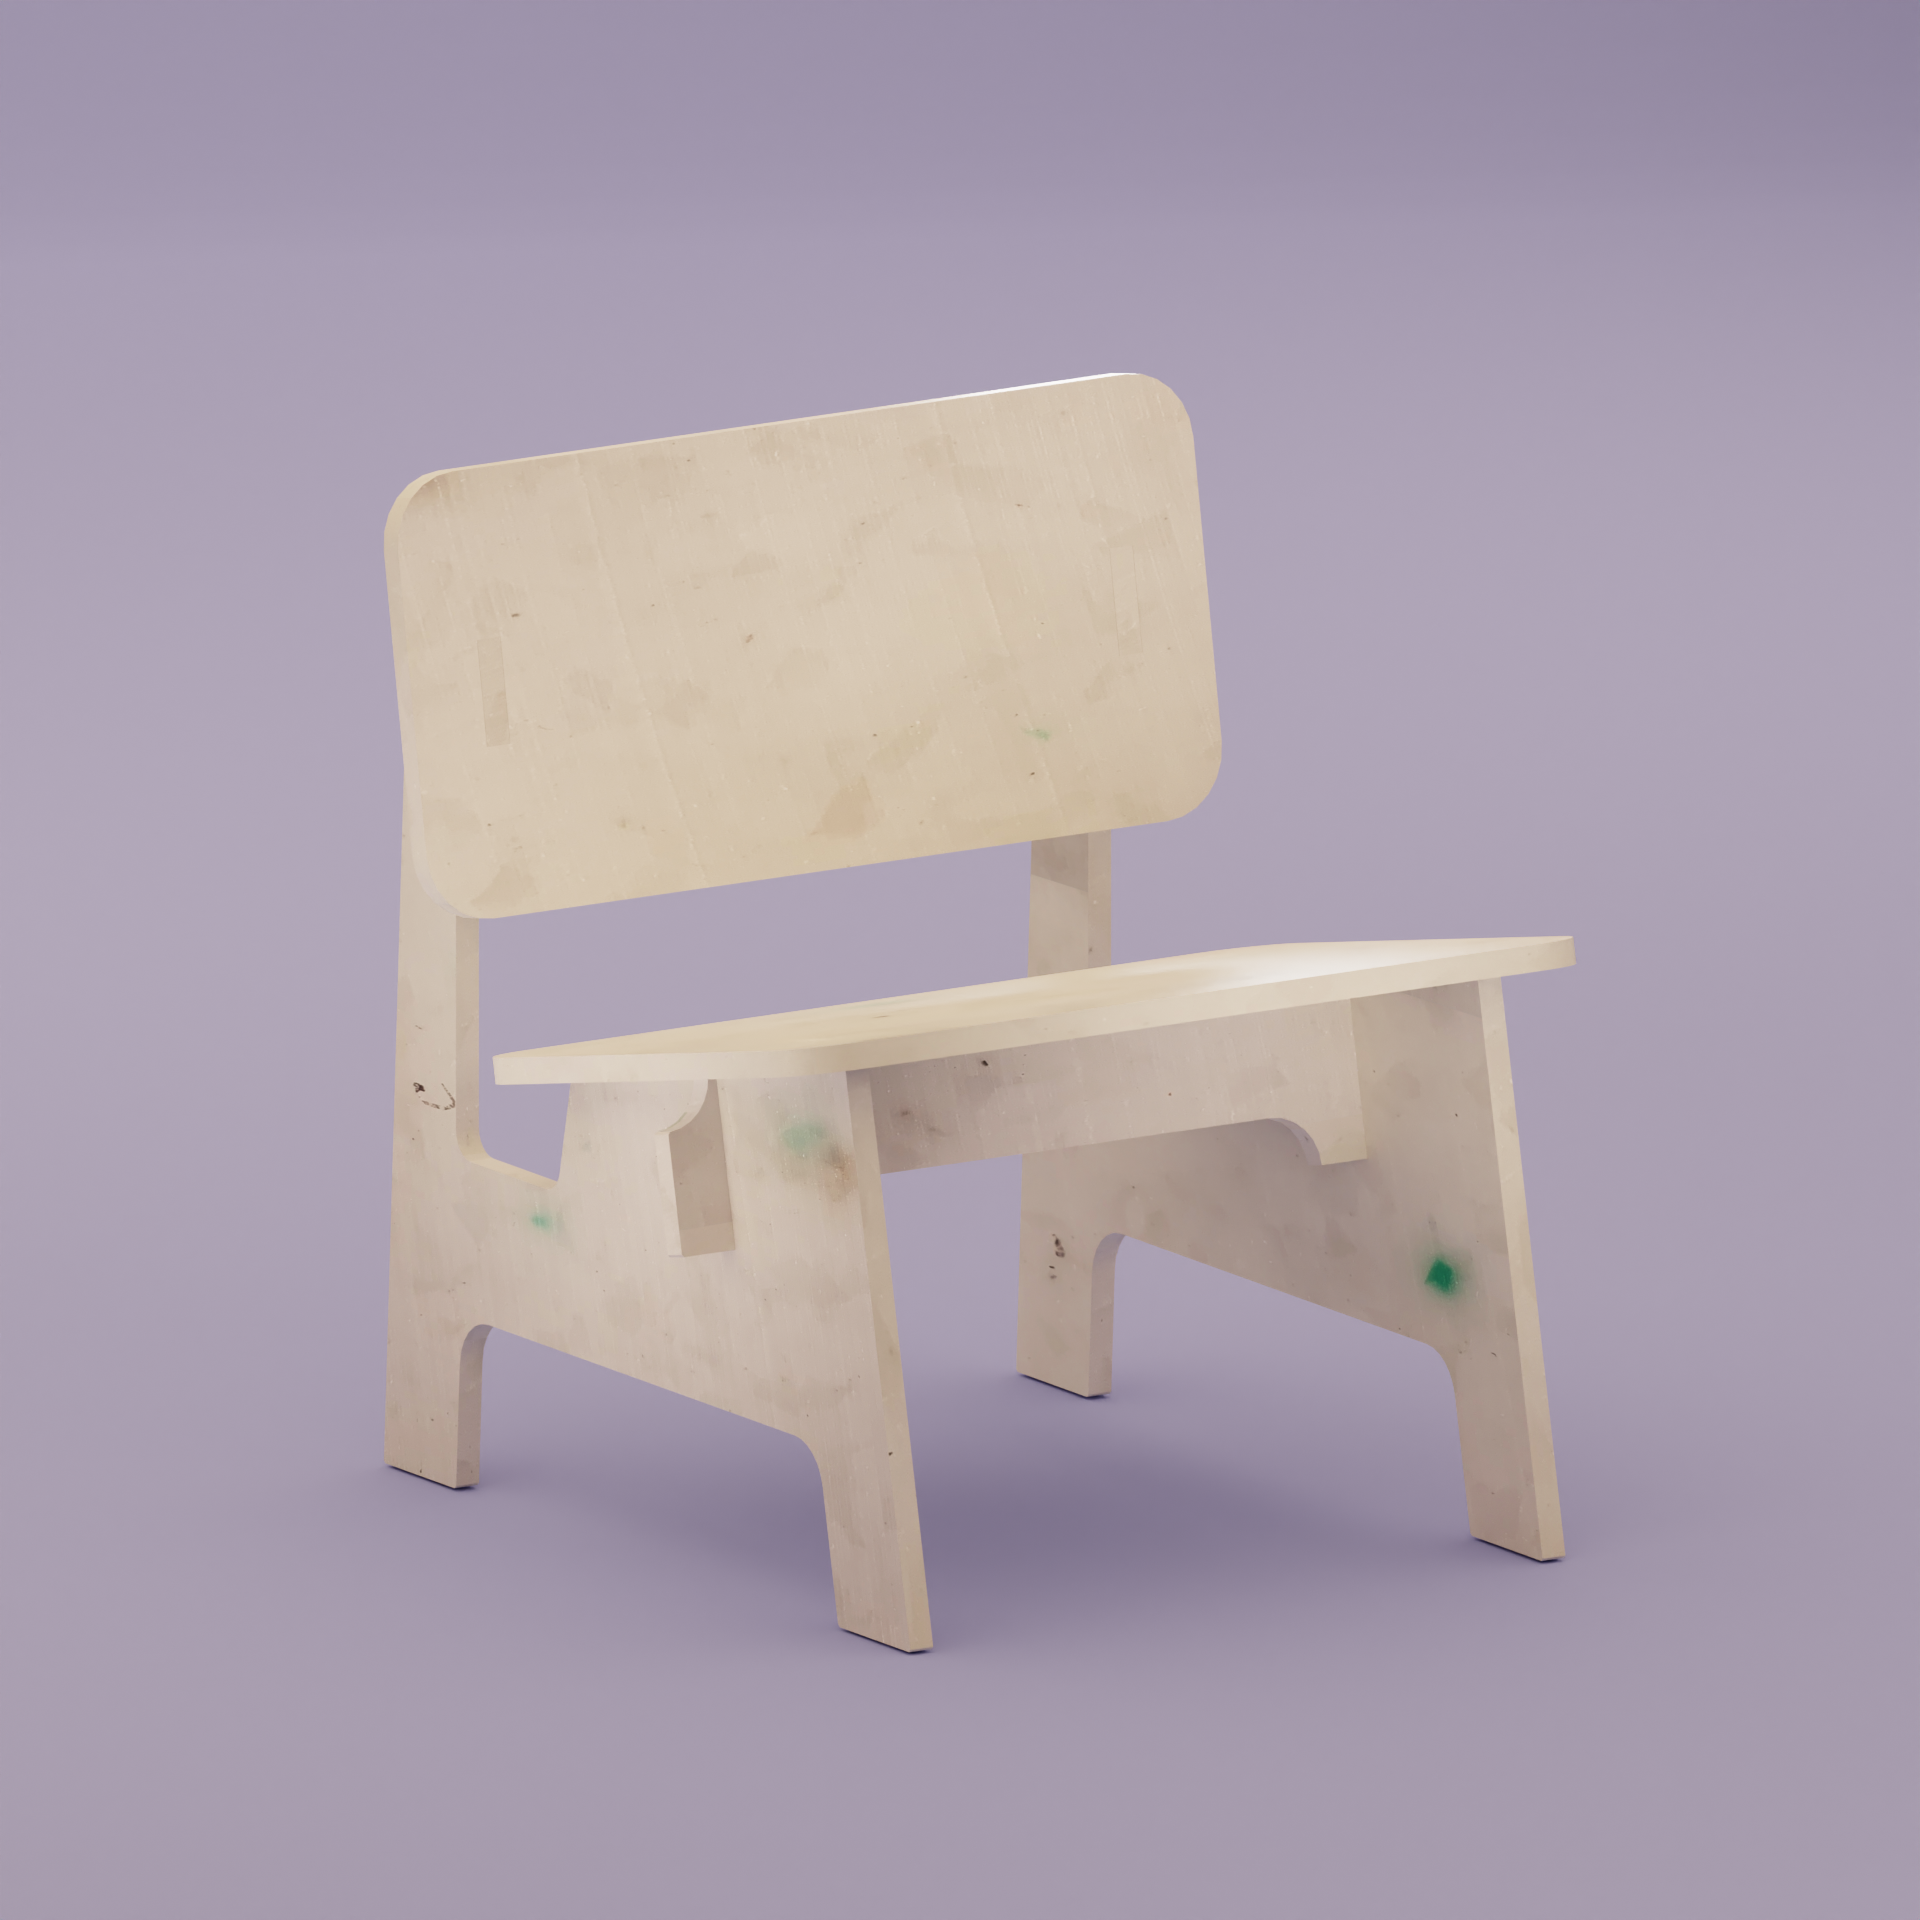 RENDER OF WHITE CHAIR BY THE MINIMONO PROJECT - BRAND FOR ECO FRIENDLY - PLAYFUL - MULTI FUNCTIONAL - SUSTAINABLE - HIGH QUALITY - DESIGN FURNITURE FROM RECYCLED PLASTIC FOR BOTH ADULT AND CHILDREN MADE IN BERLIN GERMANY